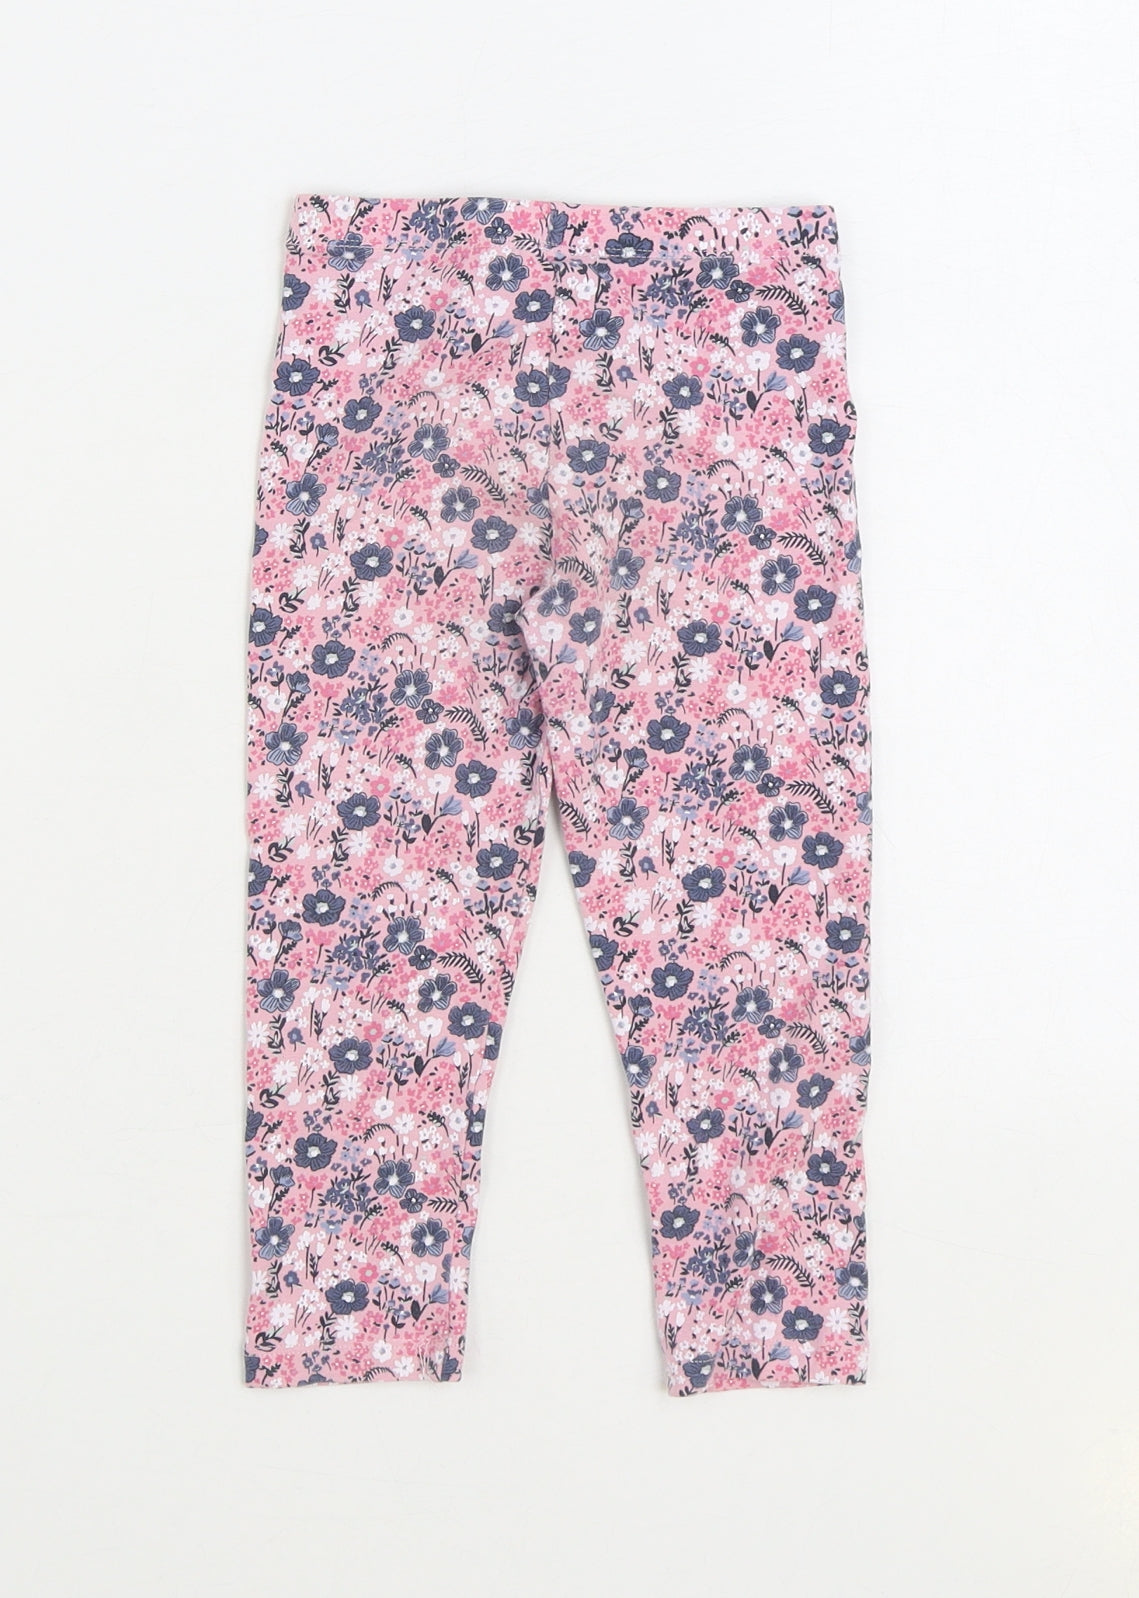 Matalan Girls Multicoloured Floral Cotton Jogger Trousers Size 2-3 Years Regular Pullover - Legging